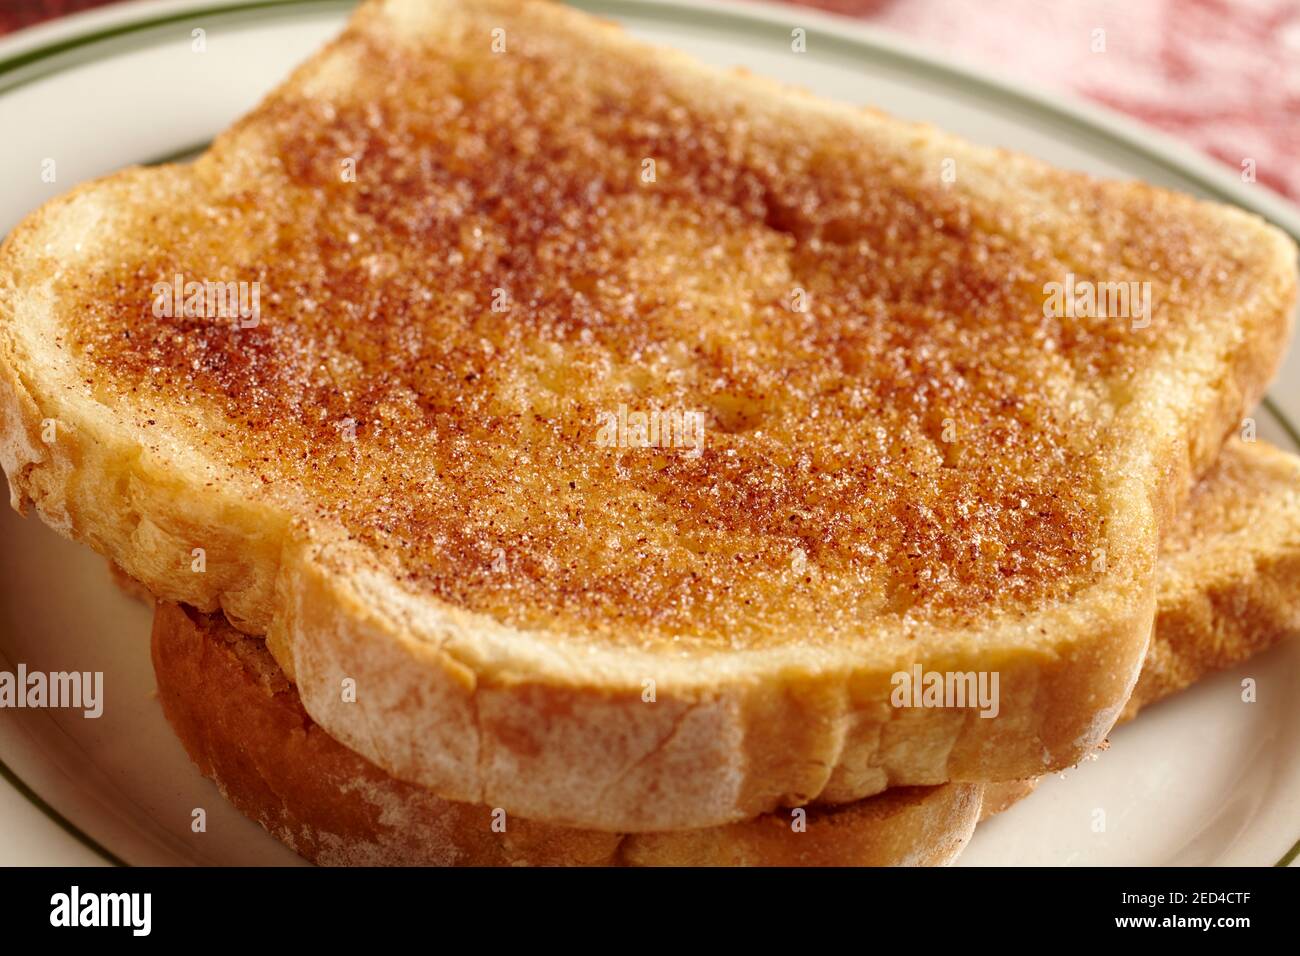 Two slices of cinnamon toast on a plate Stock Photo